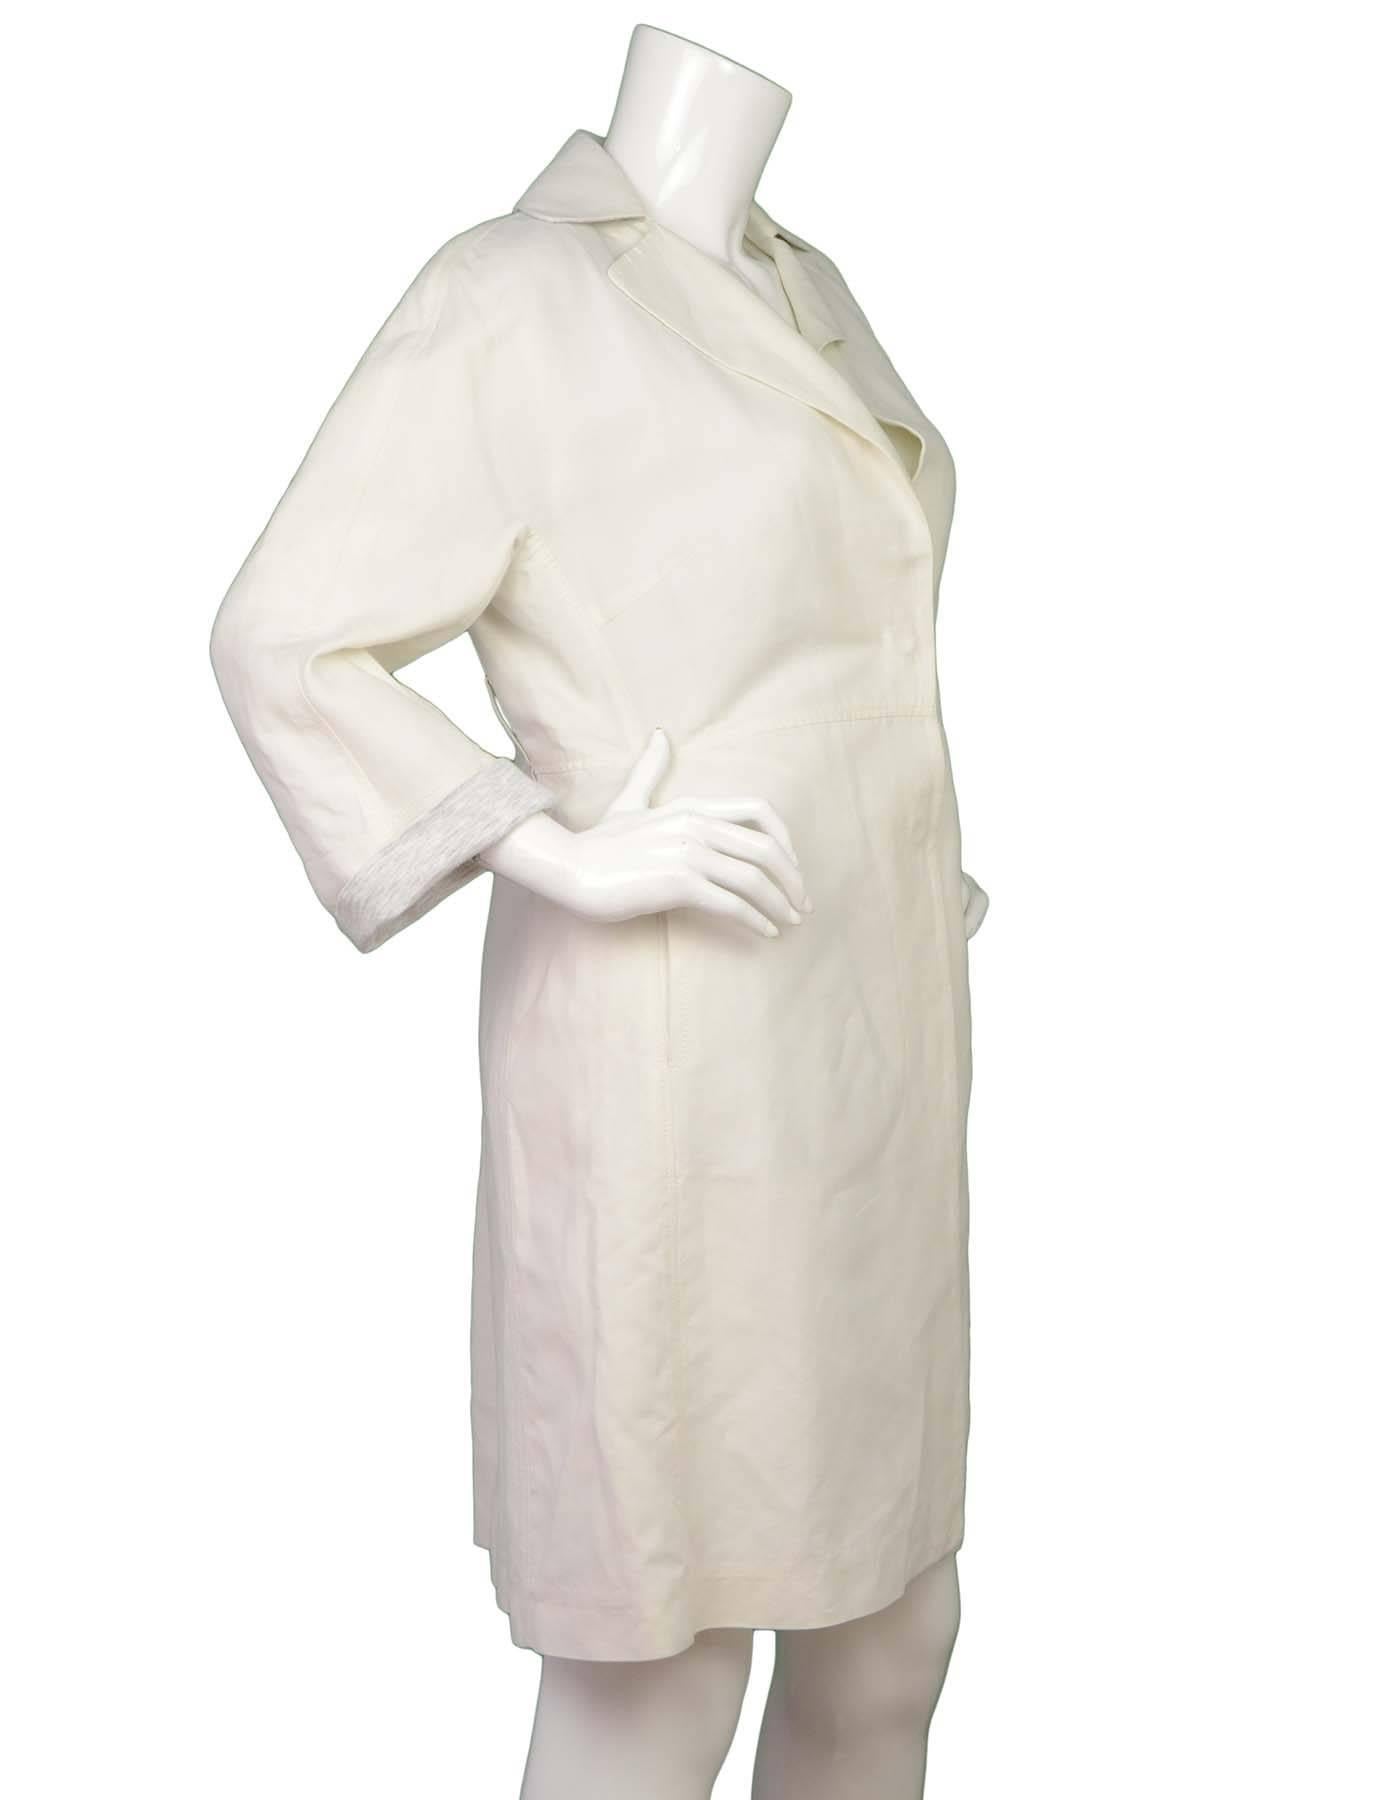 Brunello Cuccinelli White Cotton Jacket
Made In: Italy
Color: White
Composition: 55% cotton, 45% linen
Lining: Grey and white, 90% cotton, 10% lycra
Closure/Opening: Front hidden double snap closure
Exterior Pockets: Two hip slit